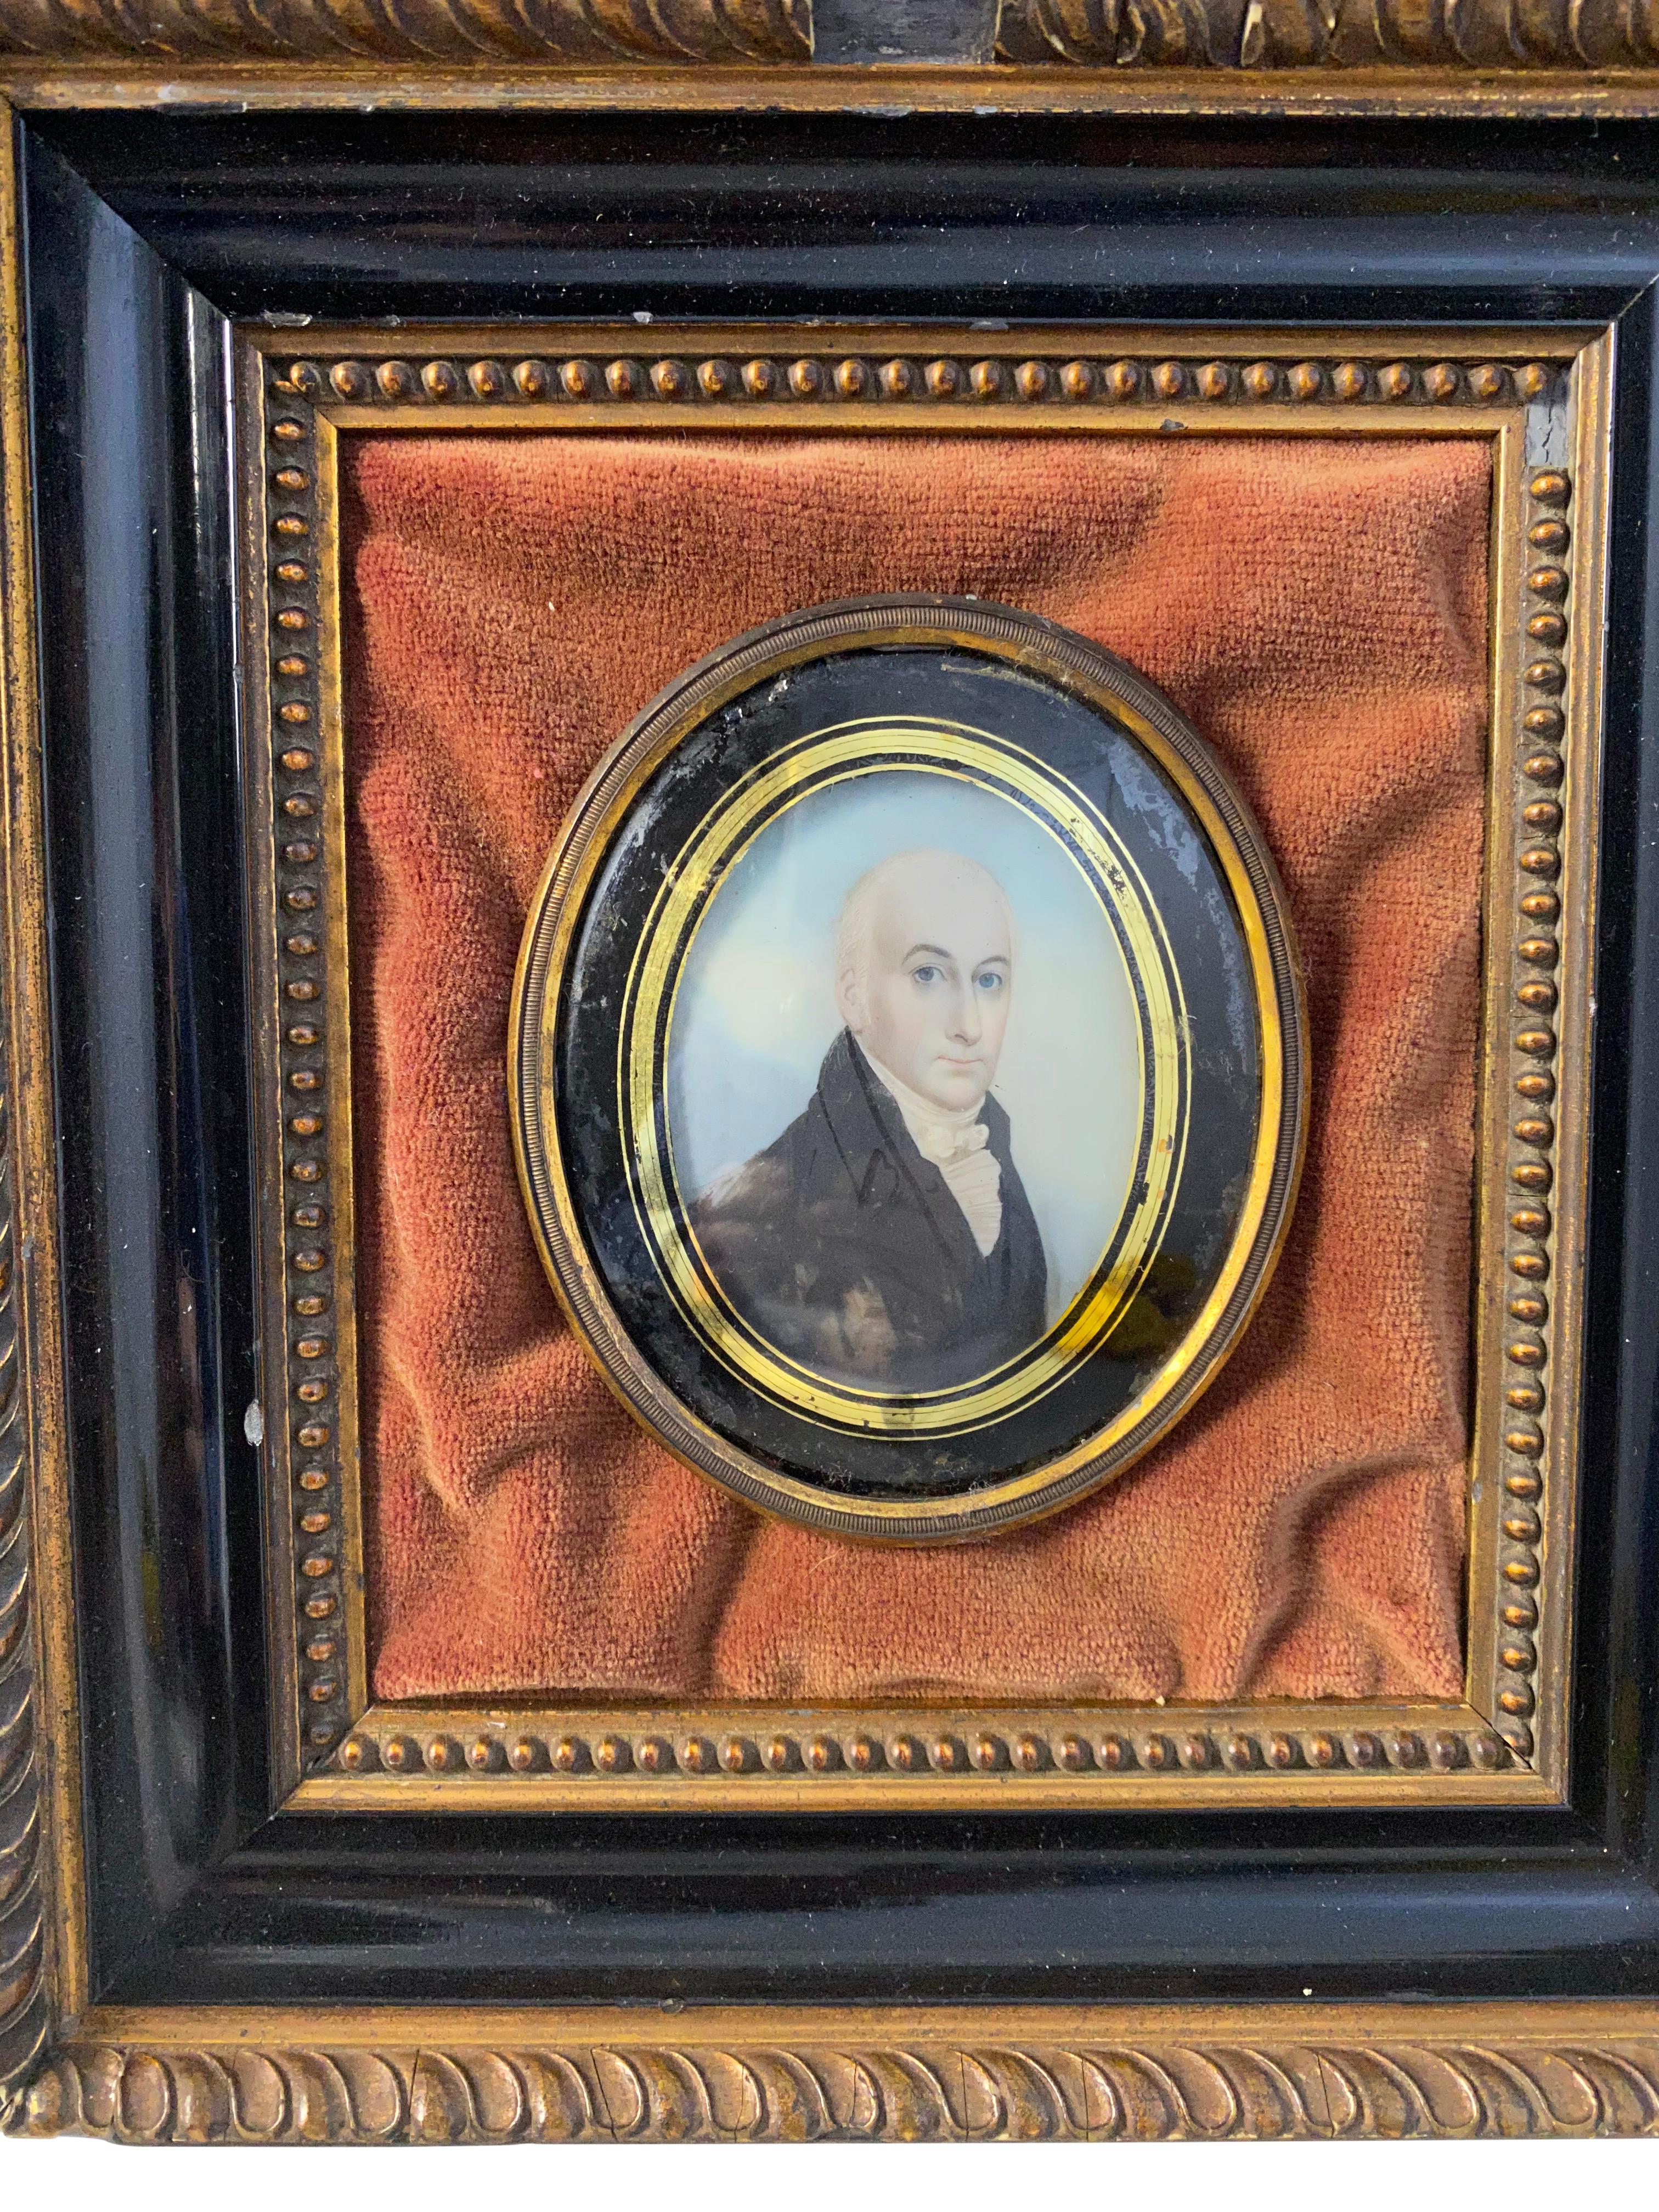 A miniature rustic framed oil on board painting of an English gentleman wearing a frock coat and stiff collar, a fashion common in Victorian England. Framed in a dome glass frame, 18th century. Unknown condition.

Dimensions (cm):
H 24, W 22, D 5.